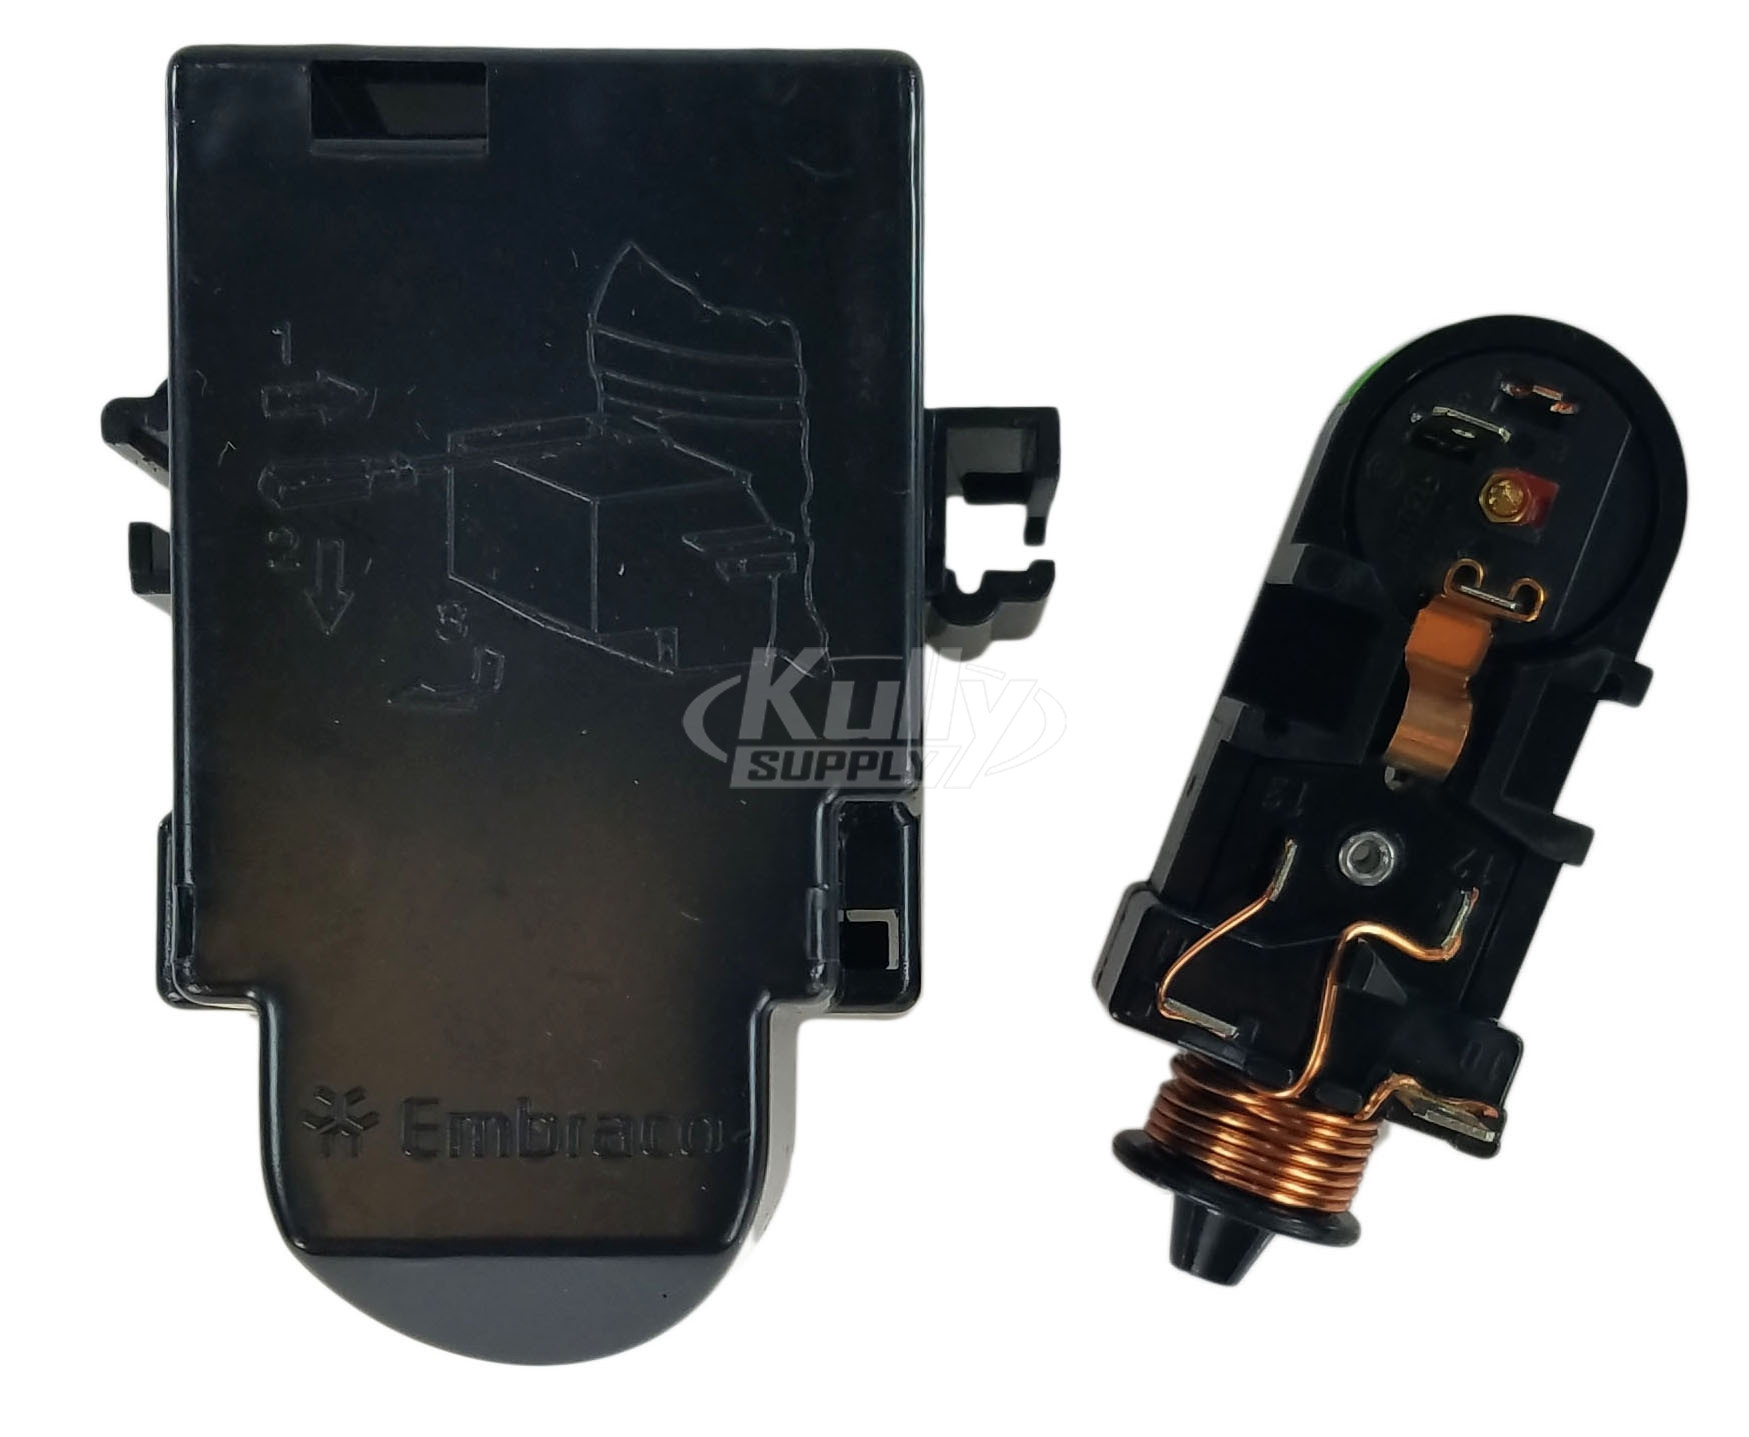 Elkay 98753C Overload, Relay, and Cover Kit (Discontinued)